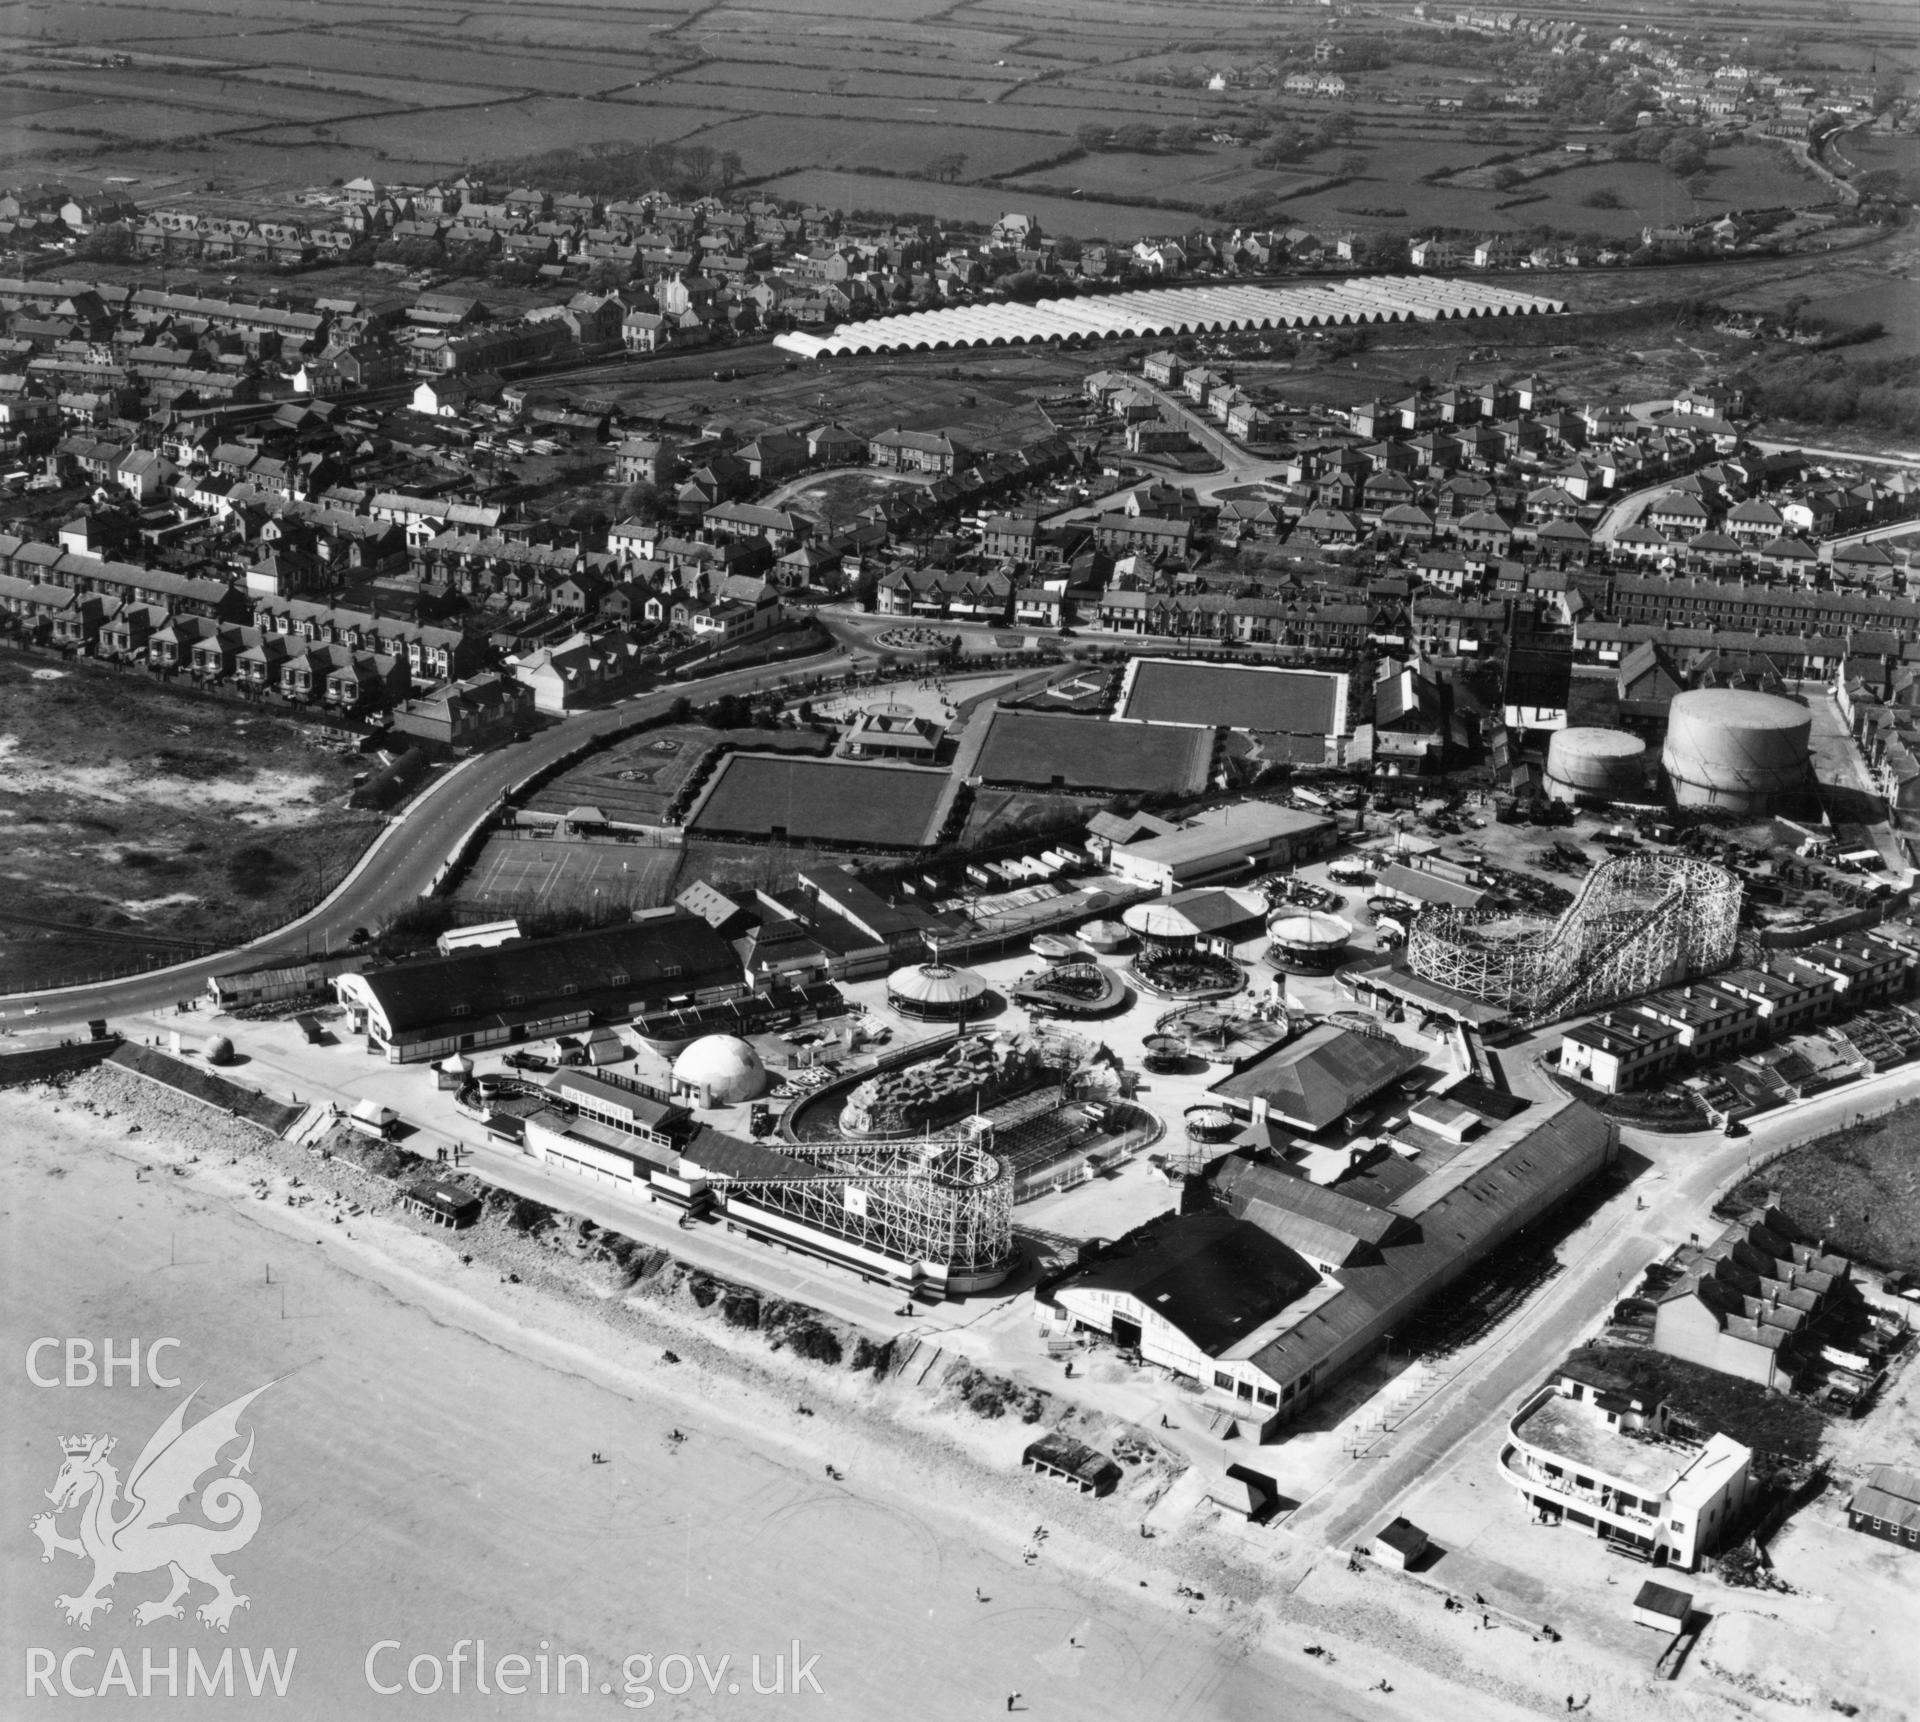 View of Coney Pleasure Palace and beach at Porthcawl. Oblique aerial photograph, 5?" cut roll film.